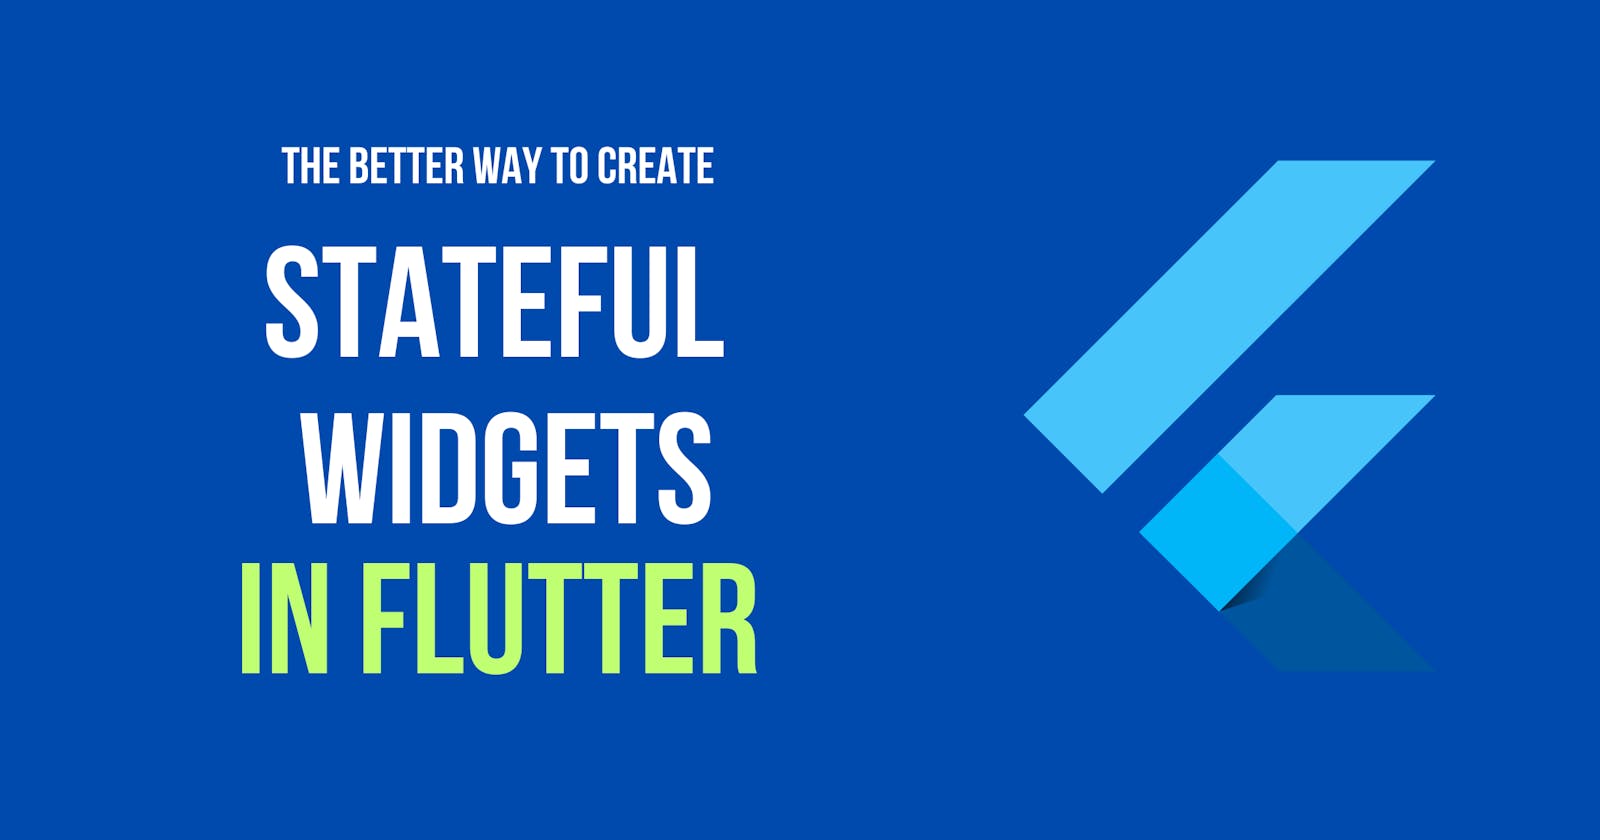 The better way to create  stateful widgets in flutter